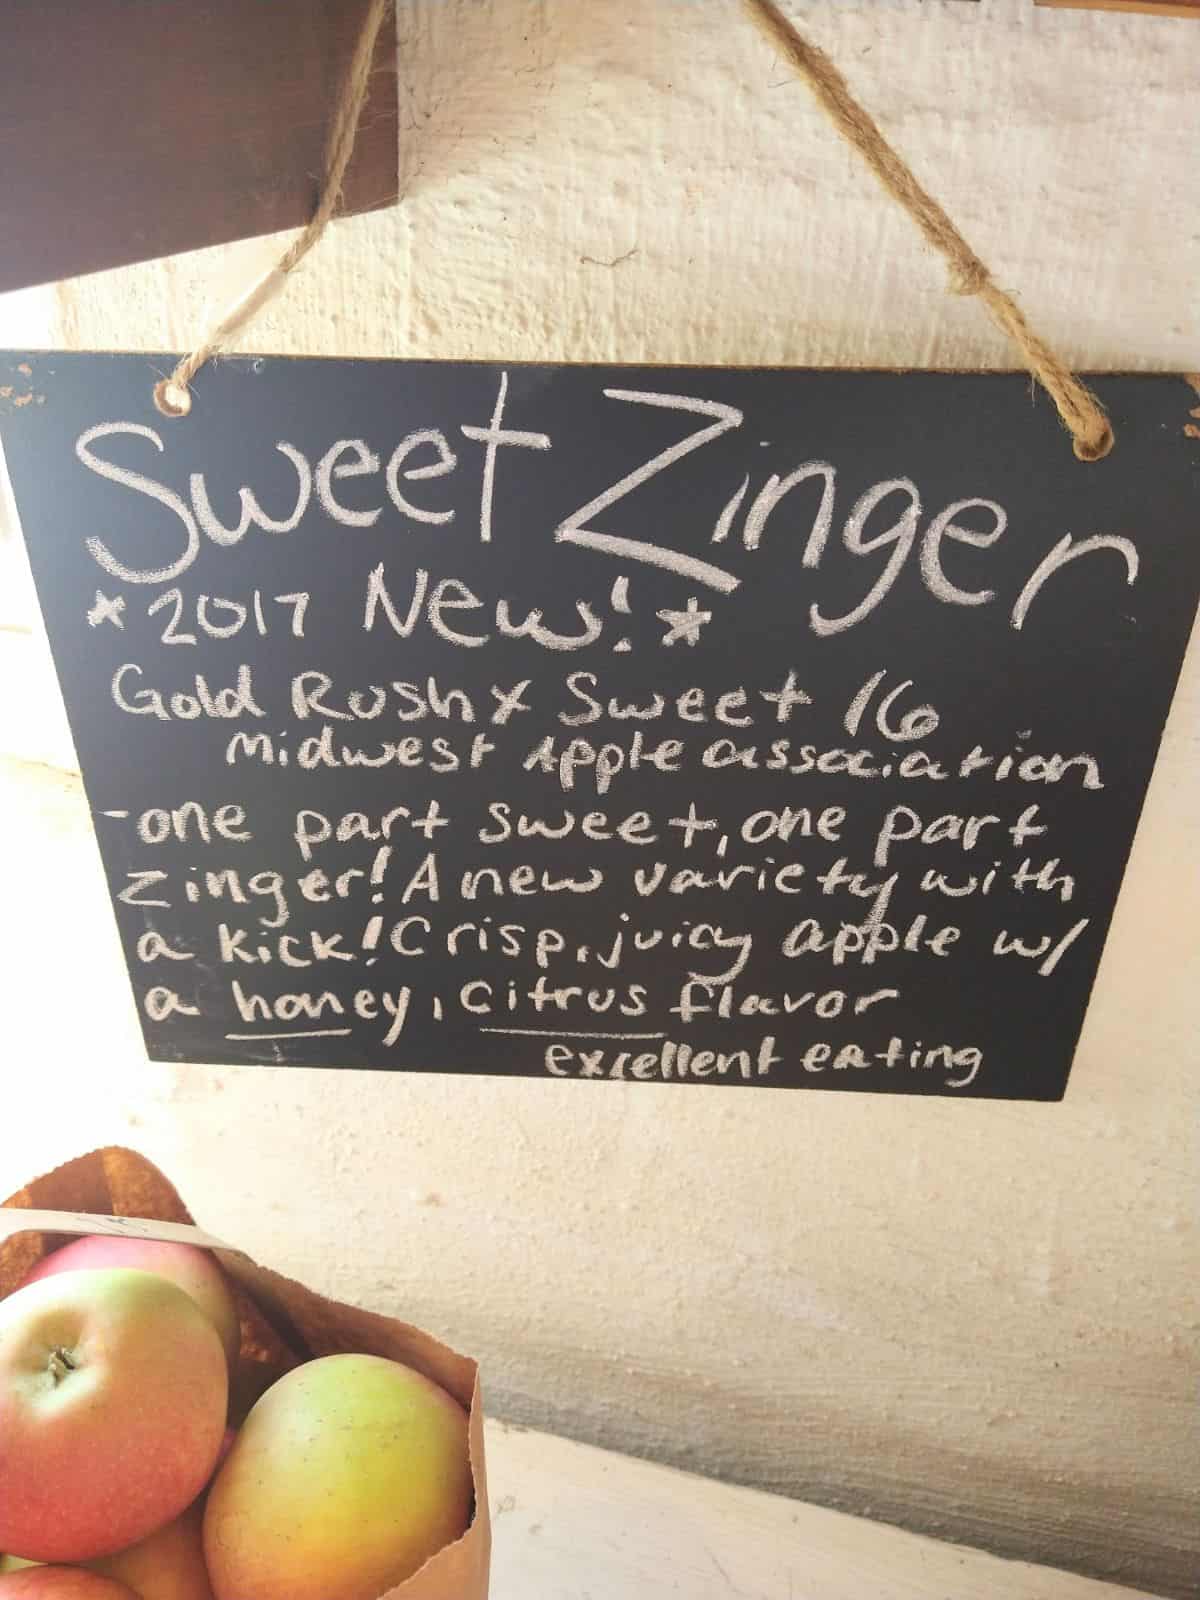 A chalkboard sign that reads "Sweet Zinger - 2017 New! Gold Rush x Sweet 16 Midwest Apple Association. - One part sweet, one part Zinger! A new variety with a kick! Crispy, juicy apple with a honey, citrus flavor. Excellent eating. 